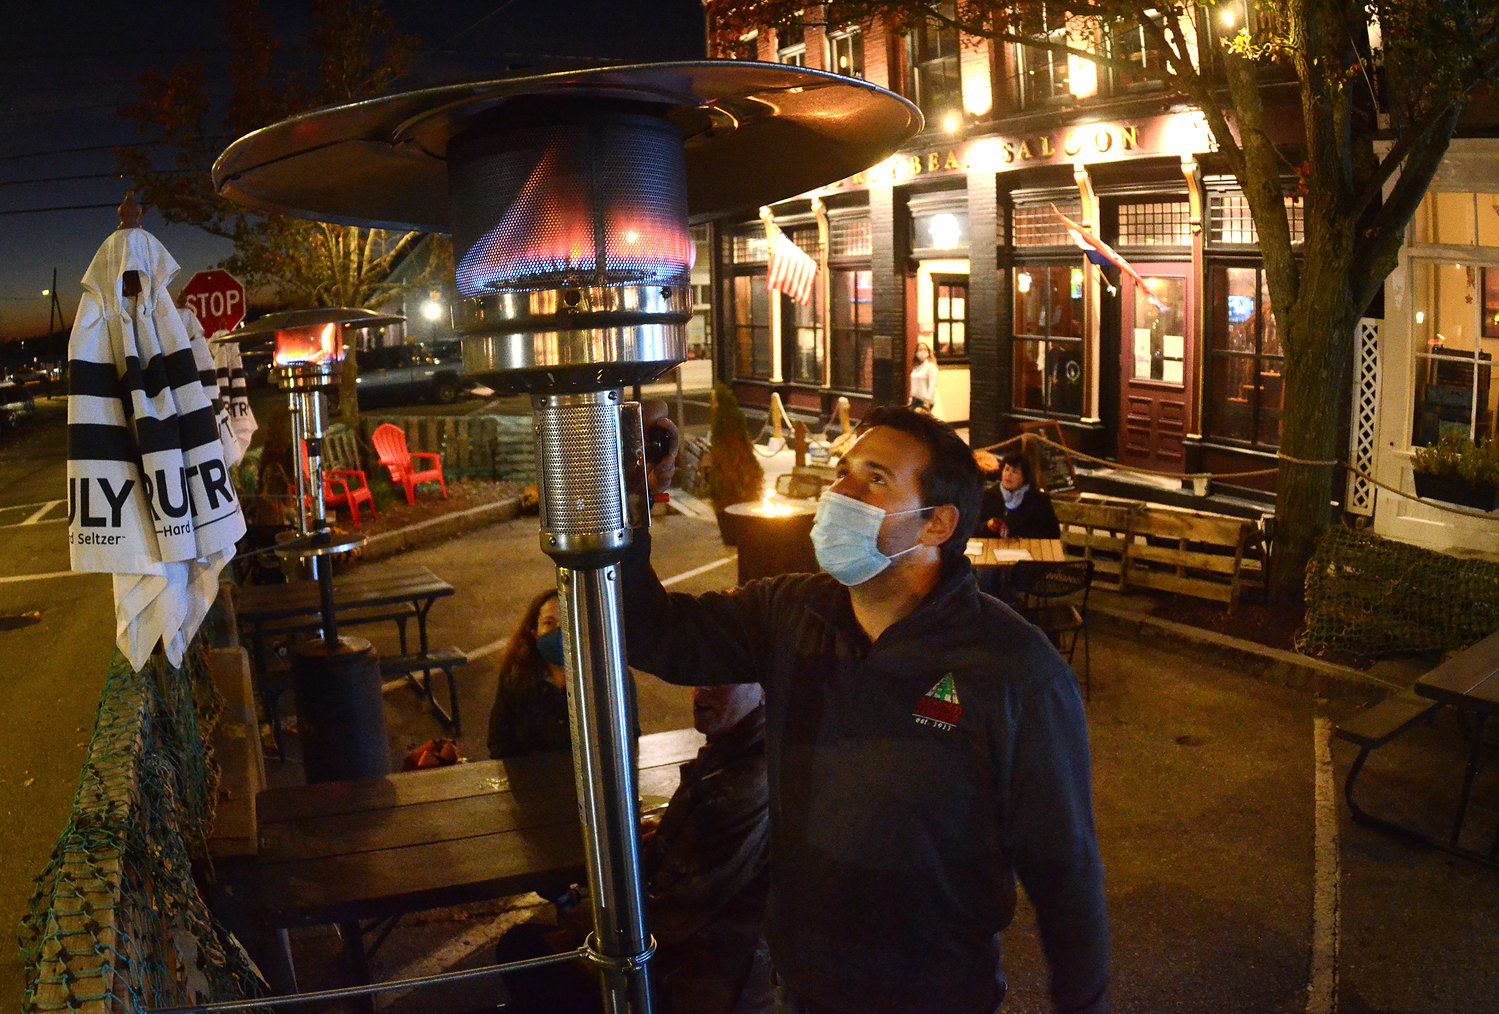 Judge Roy Bean Saloon owner Zach Rivers lights a patio heater for the restaurant's outdoor seating on State Street Tuesday night. The heaters were provided free to nearly two dozen Bristol businesses.